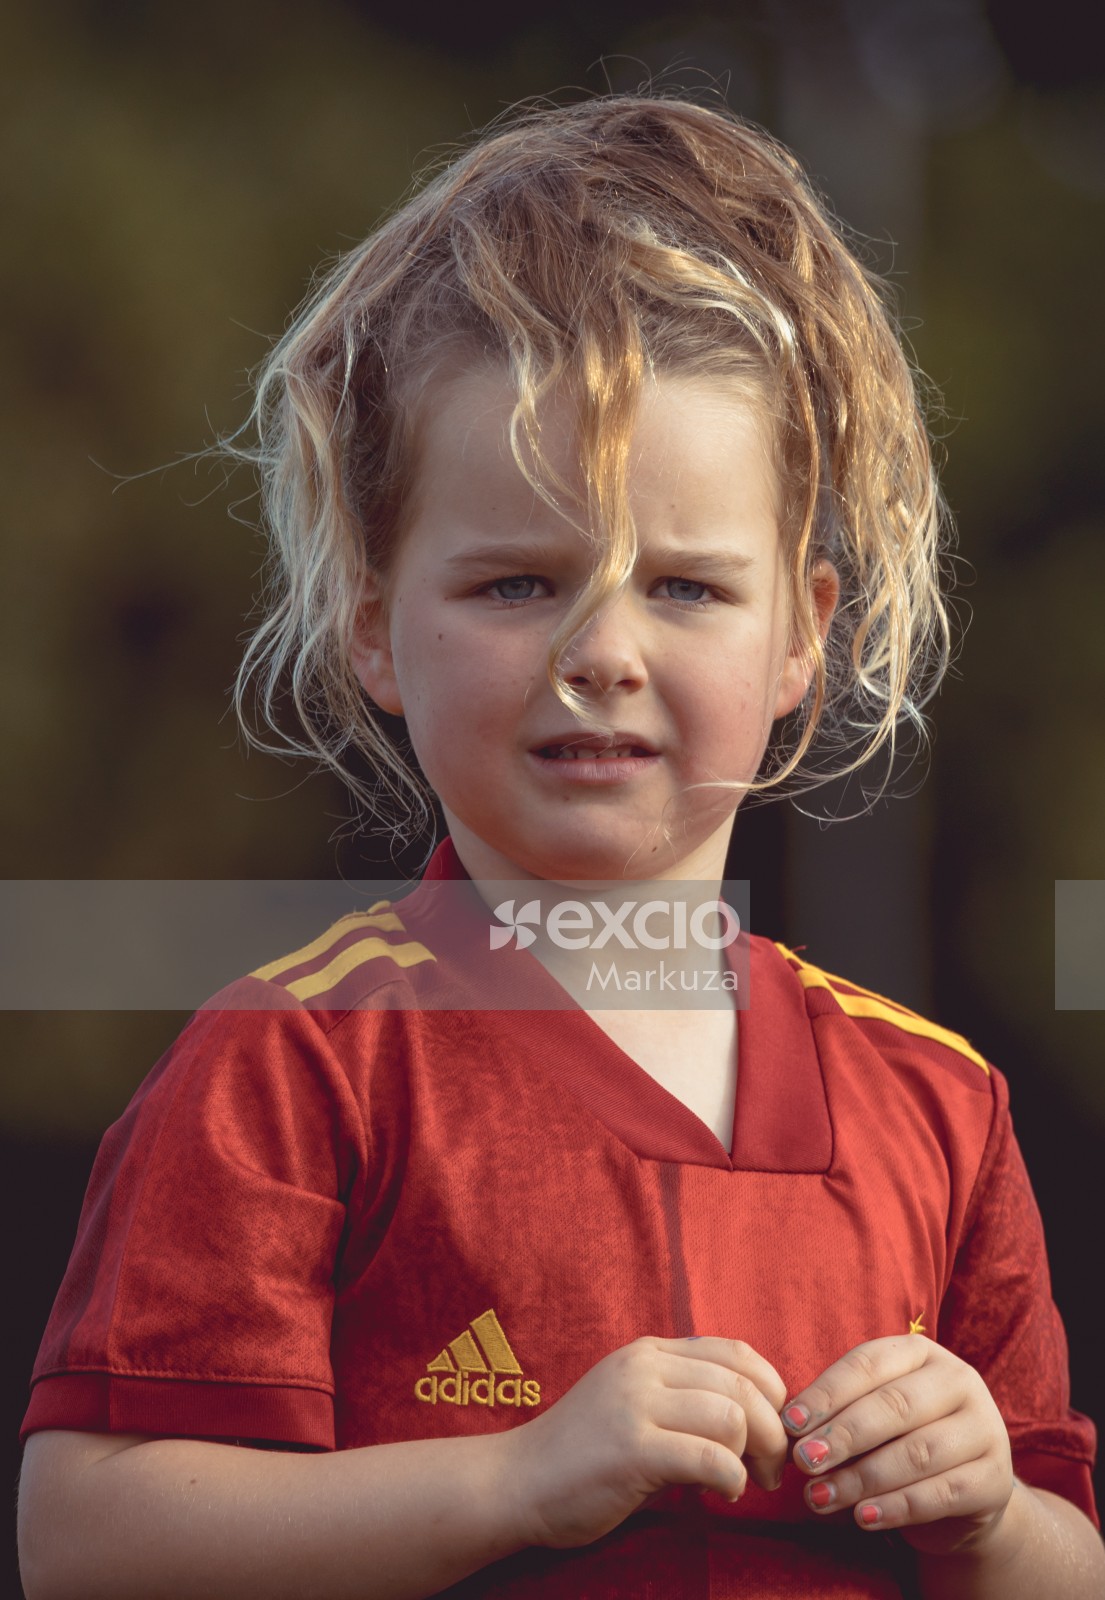 Girl in red shirt at Little Dribblers soccer match